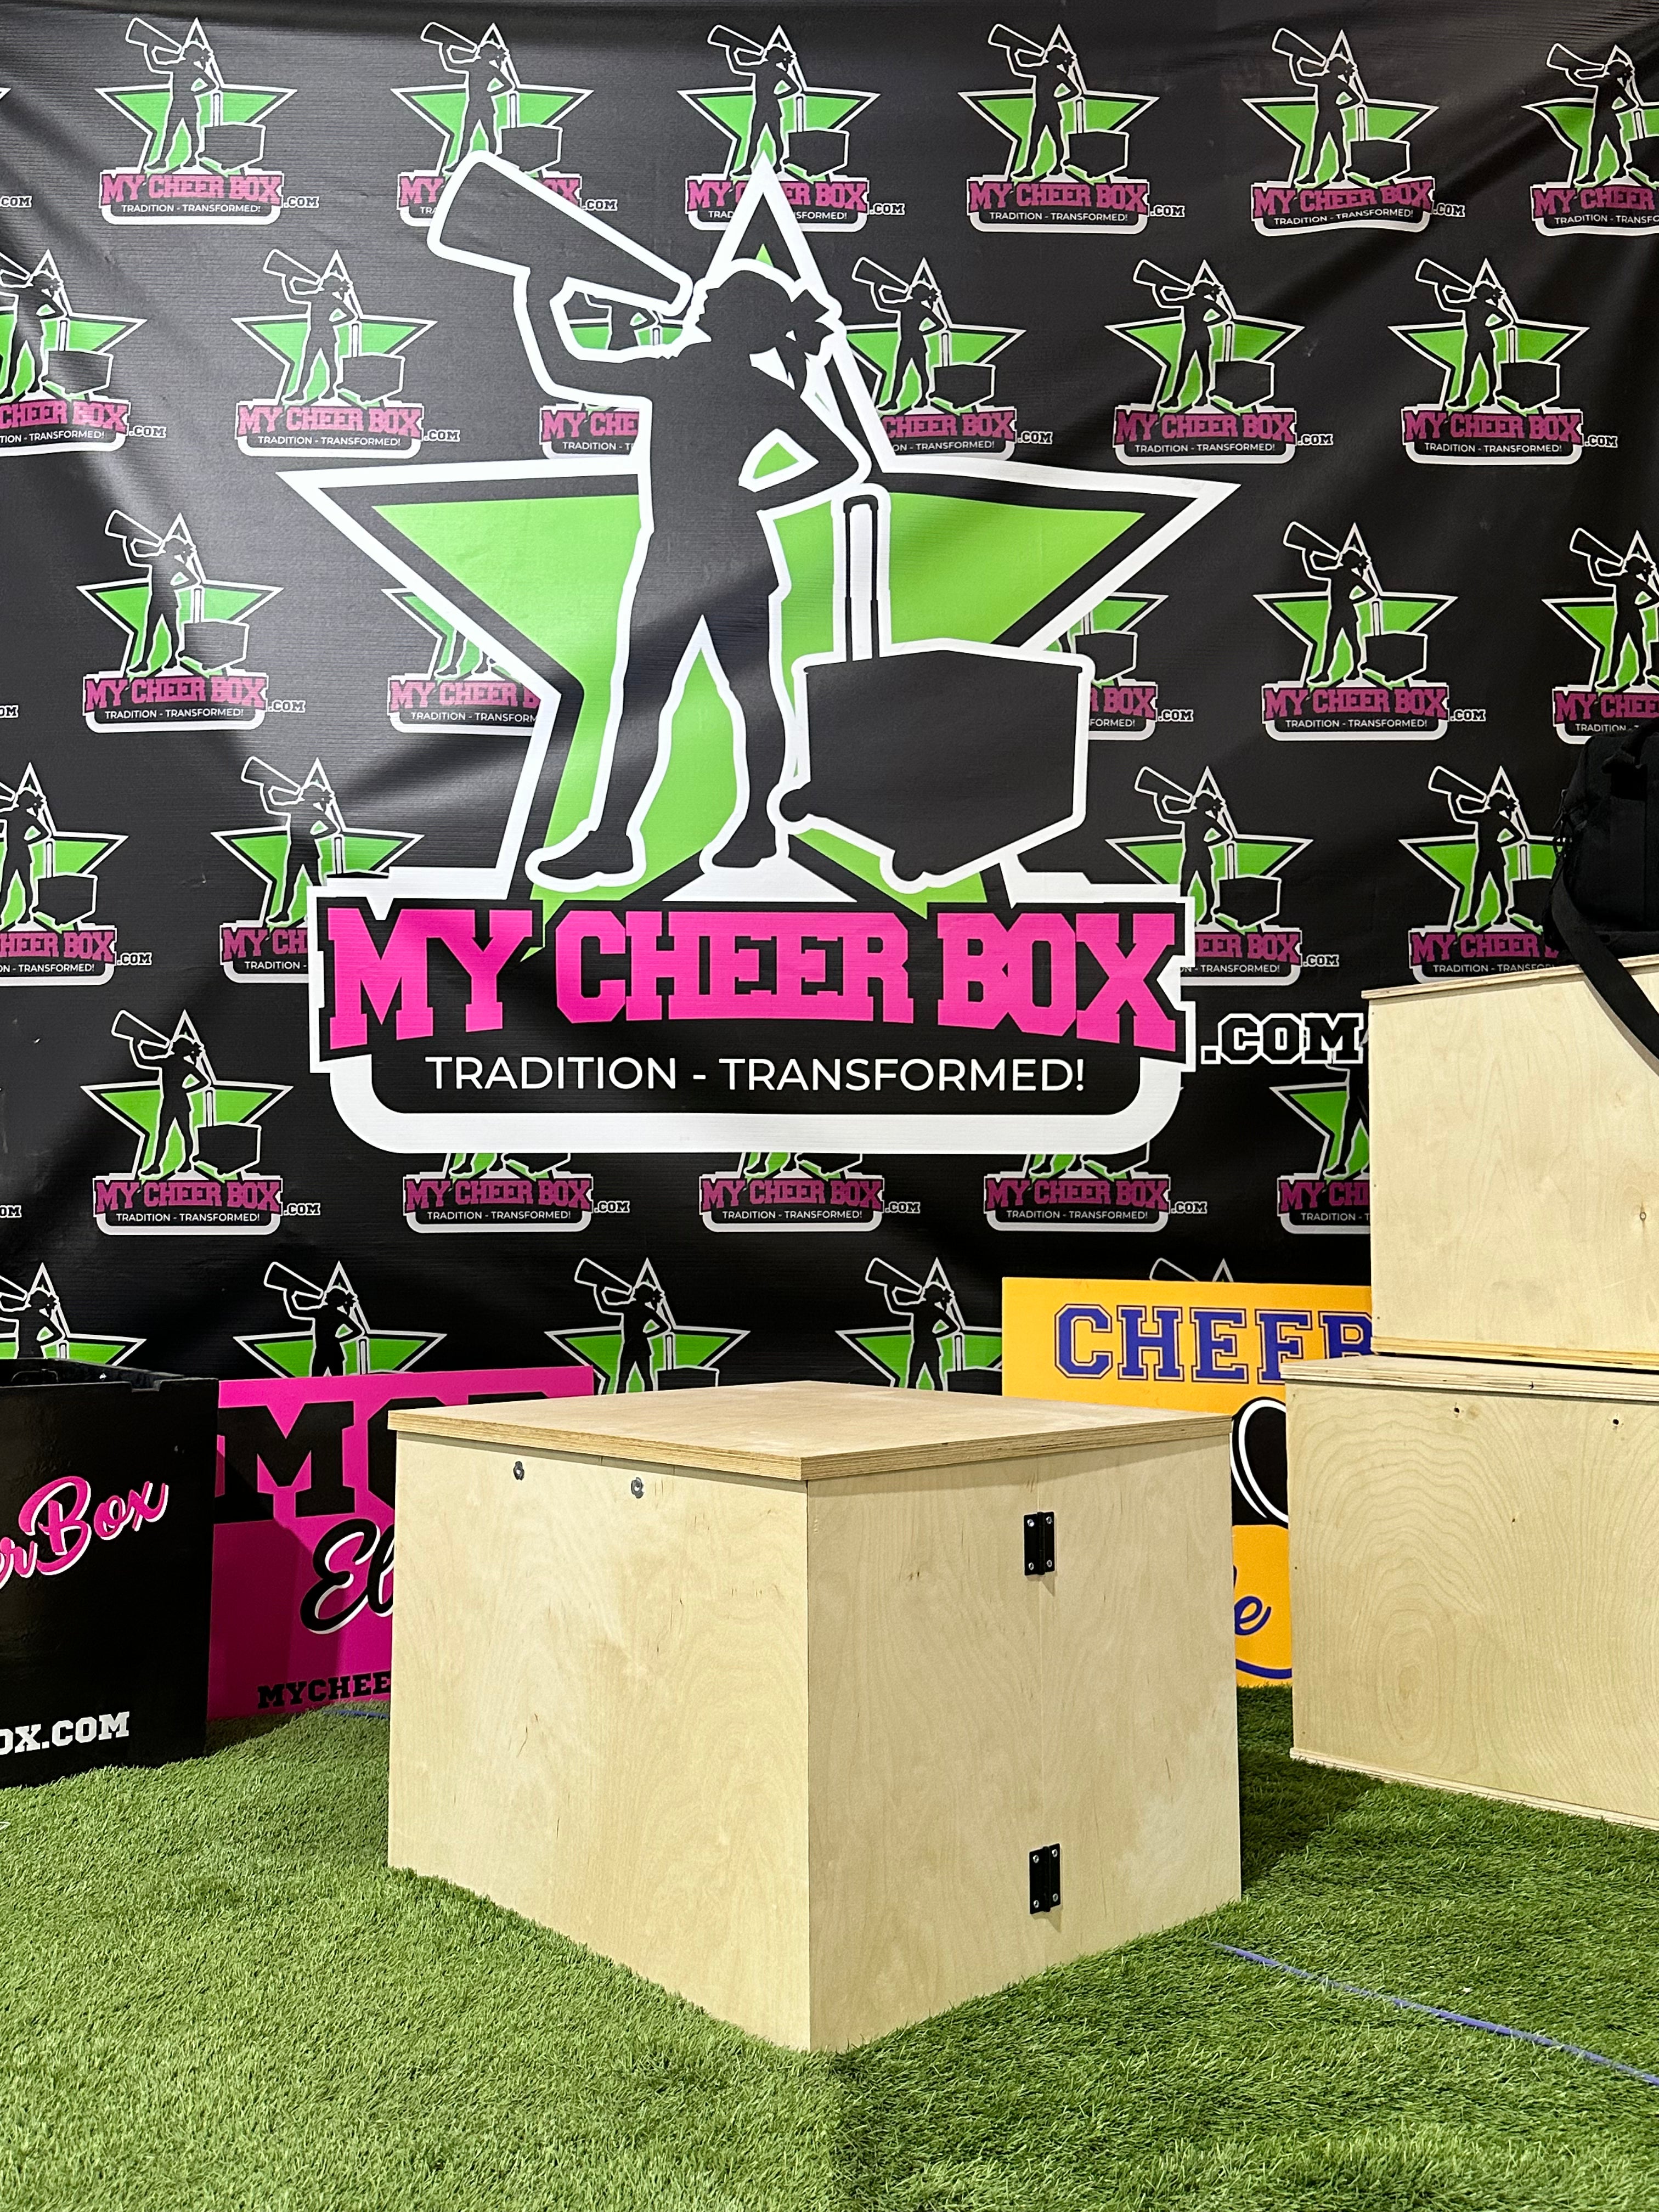 Bare Bones Full Size (Not Customizable)Bare Bones Full Size (

Bare Bones Full Size Cheer Box – a plain, unfinished cheer box with no exterior design and no added accessories. Ready for you to accessorize and design yourself.
